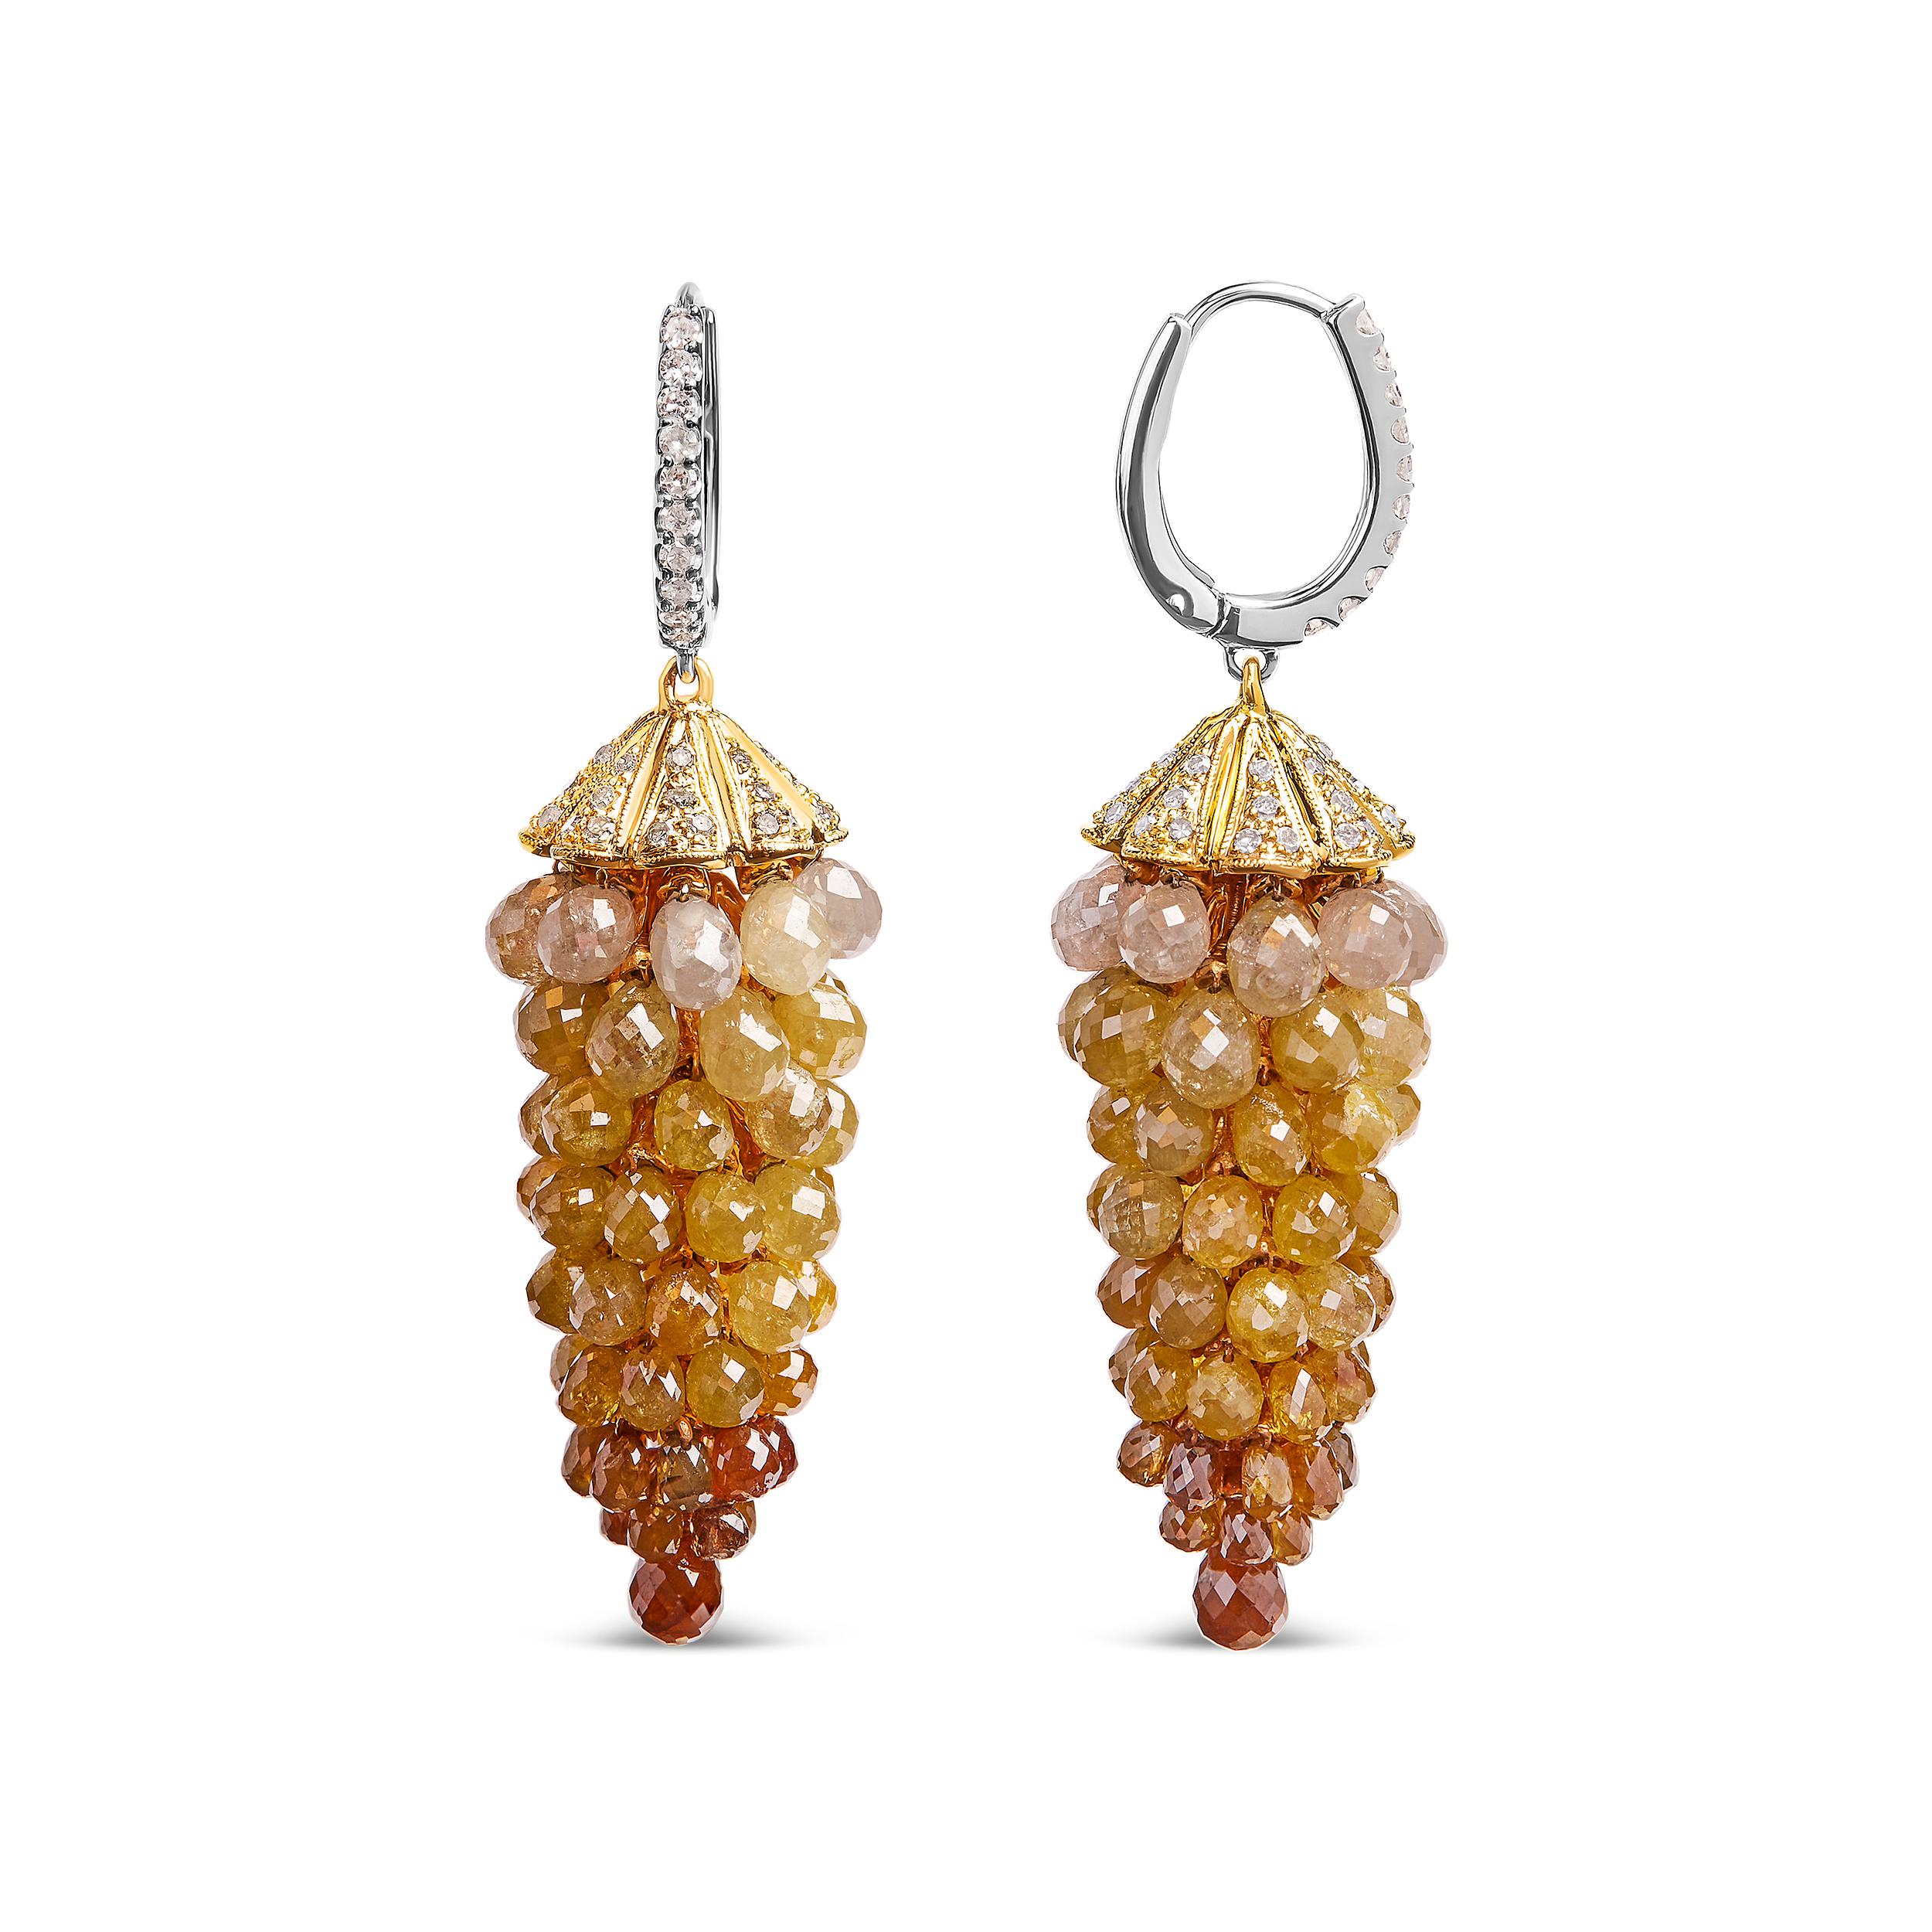 Modern 14K White and Yellow Gold 38.0 Carat Diamond Honeycomb Drop and Dangle Earring For Sale